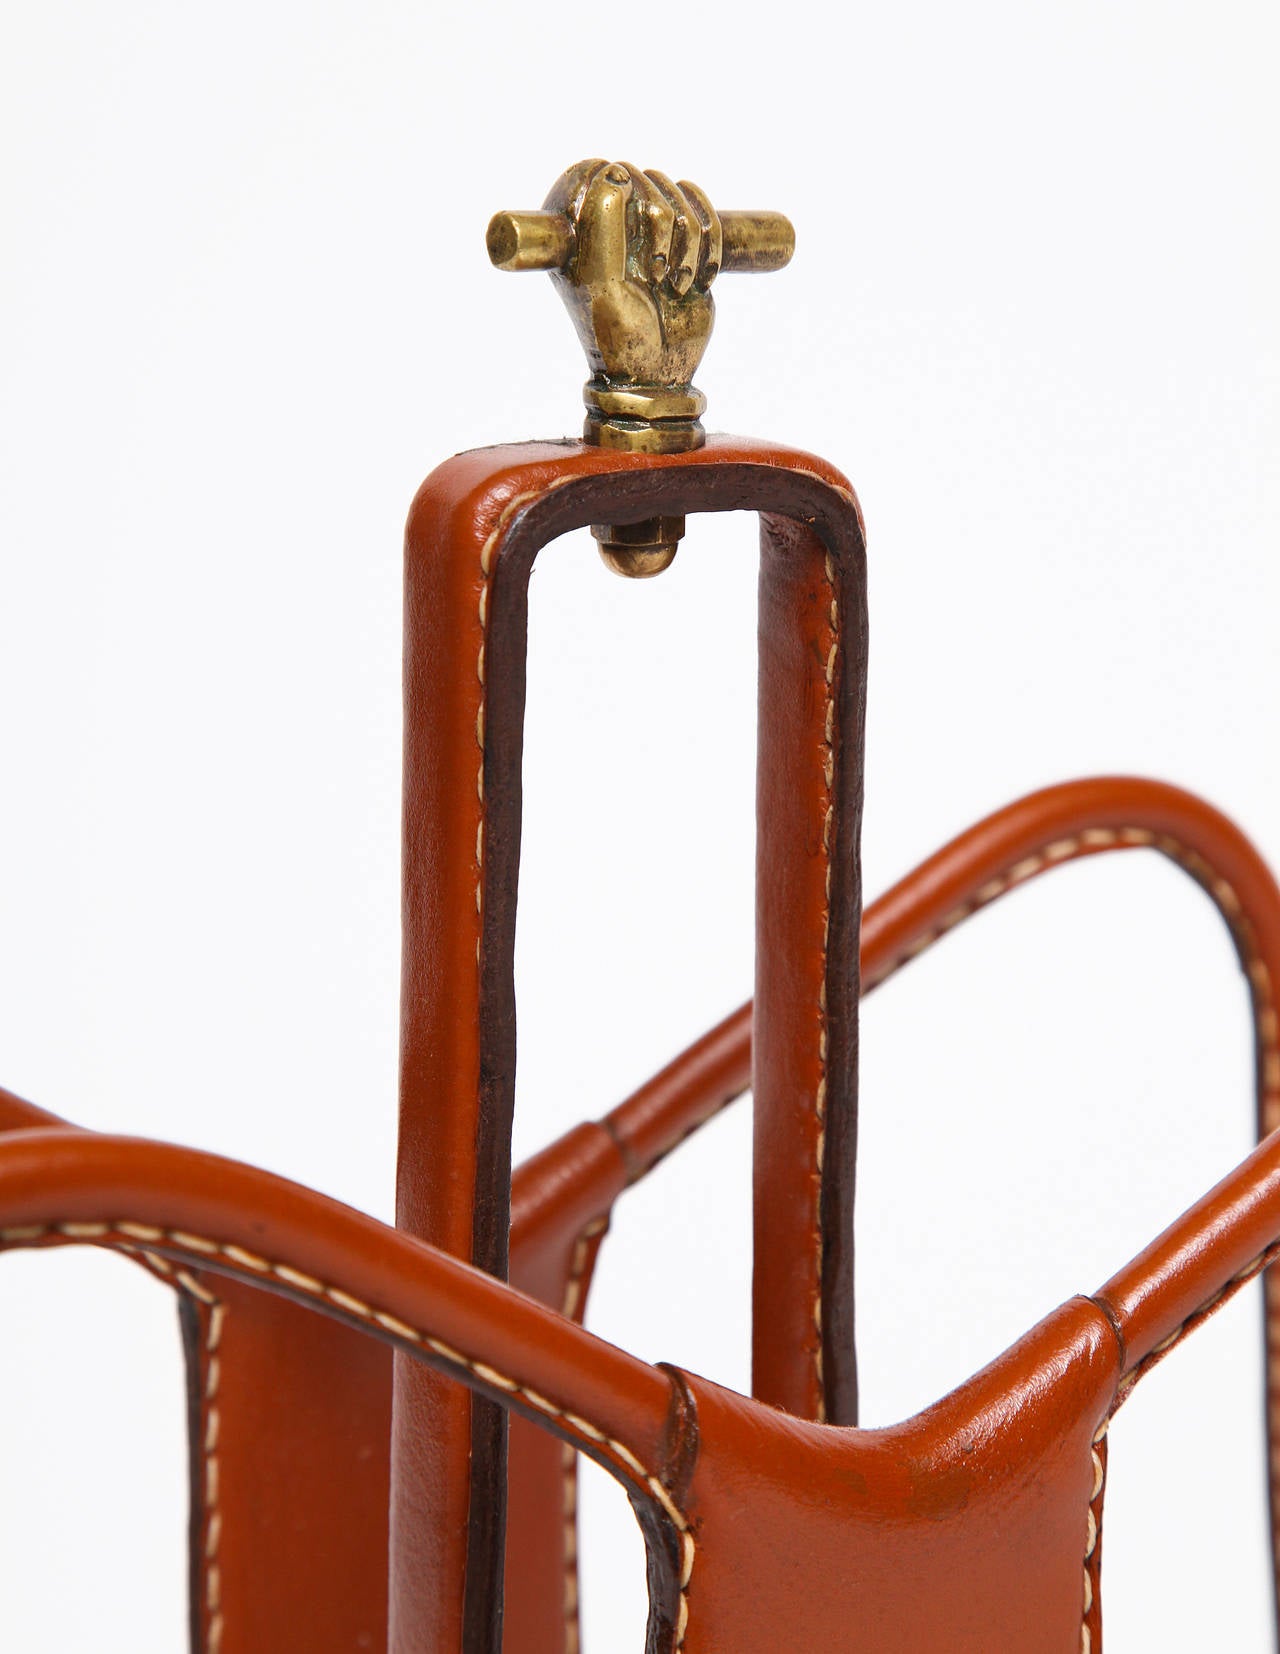 French Leather Magazine Rack by Jacques Adnet